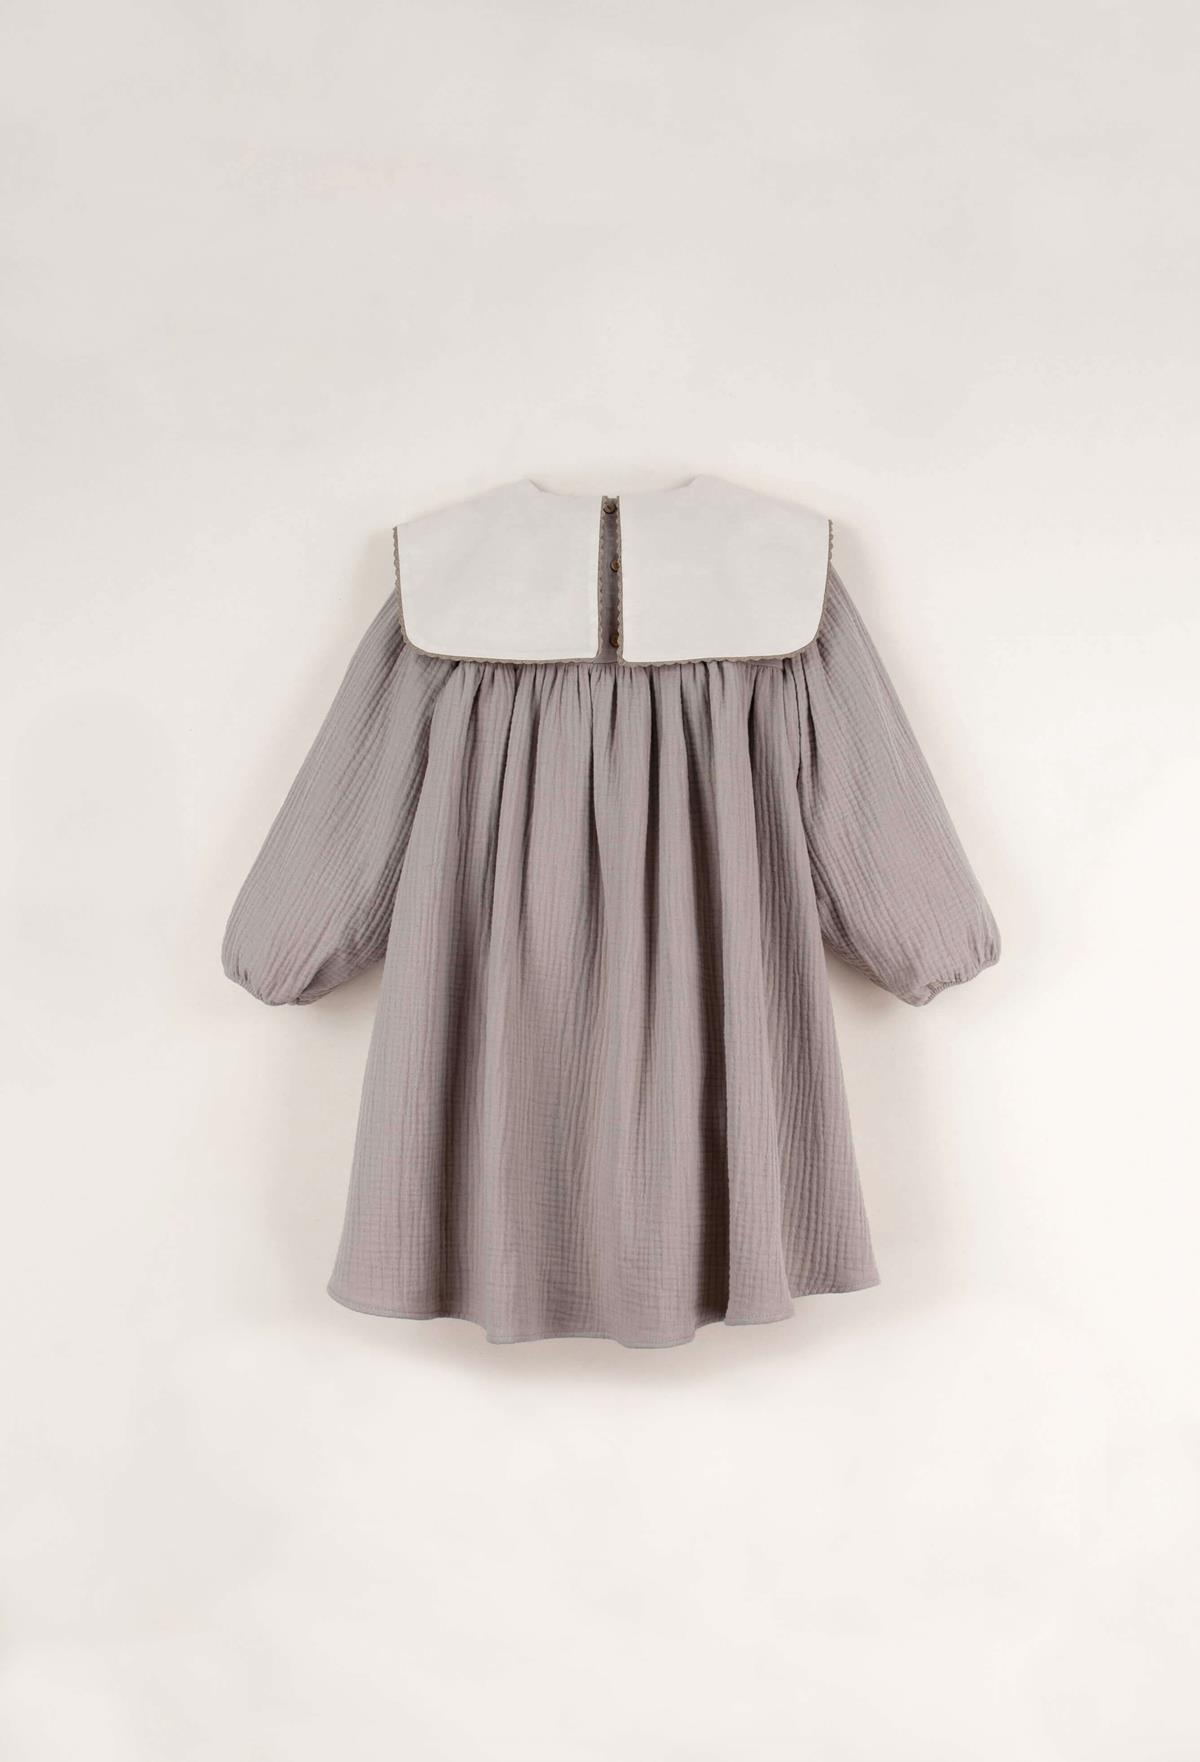 Mod.31.1 Taupe dress in organic fabric with embroidered yoke | AW22.23 Mod.31.1 Taupe dress in organic fabric with embroidered yoke